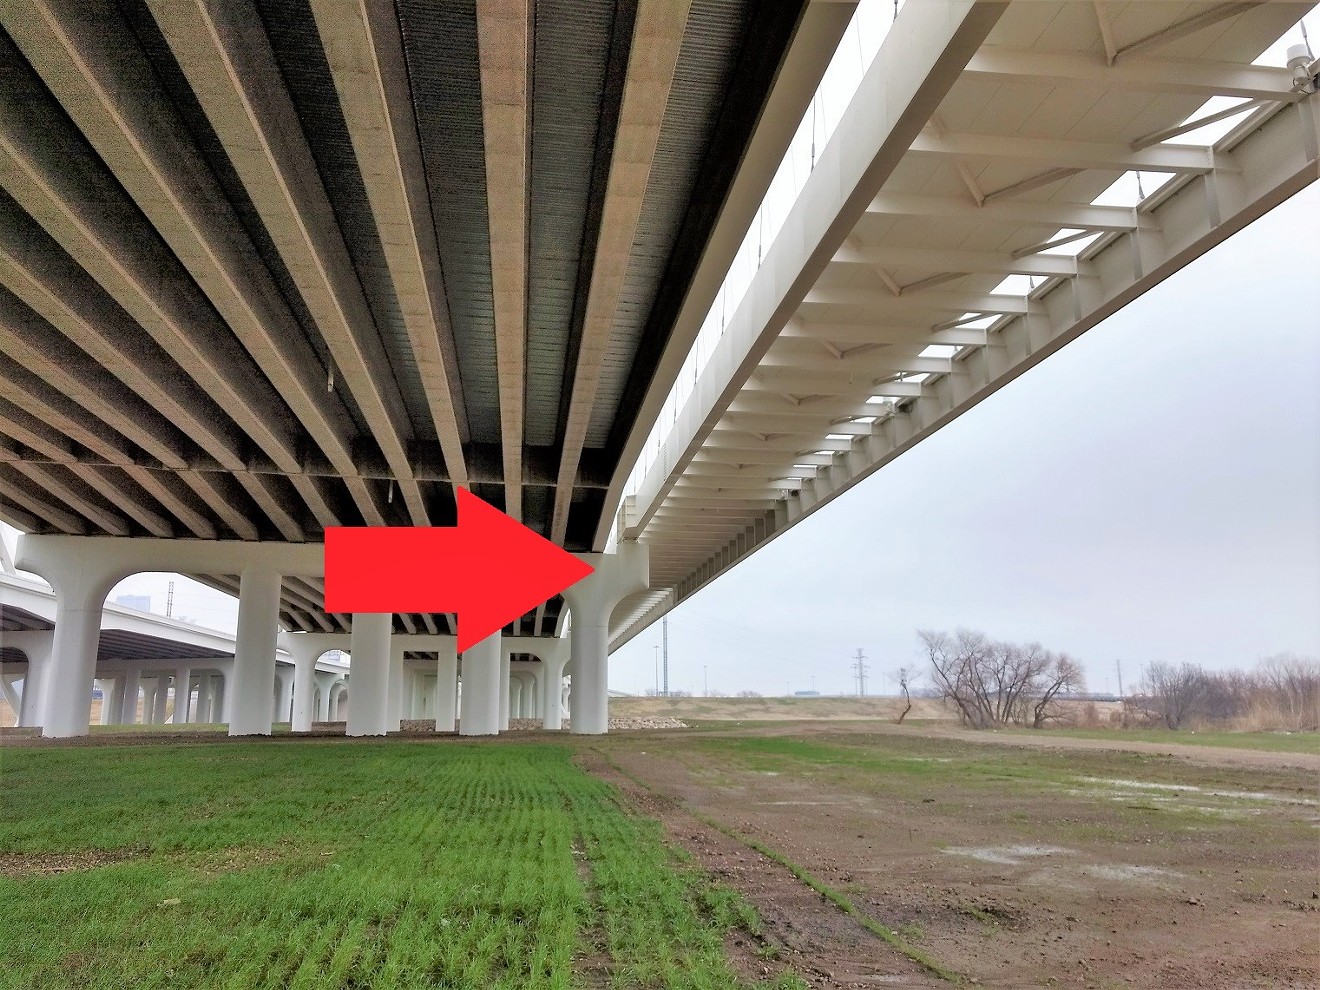 The bike lanes hanging from the massive Calatrava arches are tacked to the sides of the highway bridges in an apparently unsuccessful attempt to stabilize them, but they provide no support to the highway bridges.